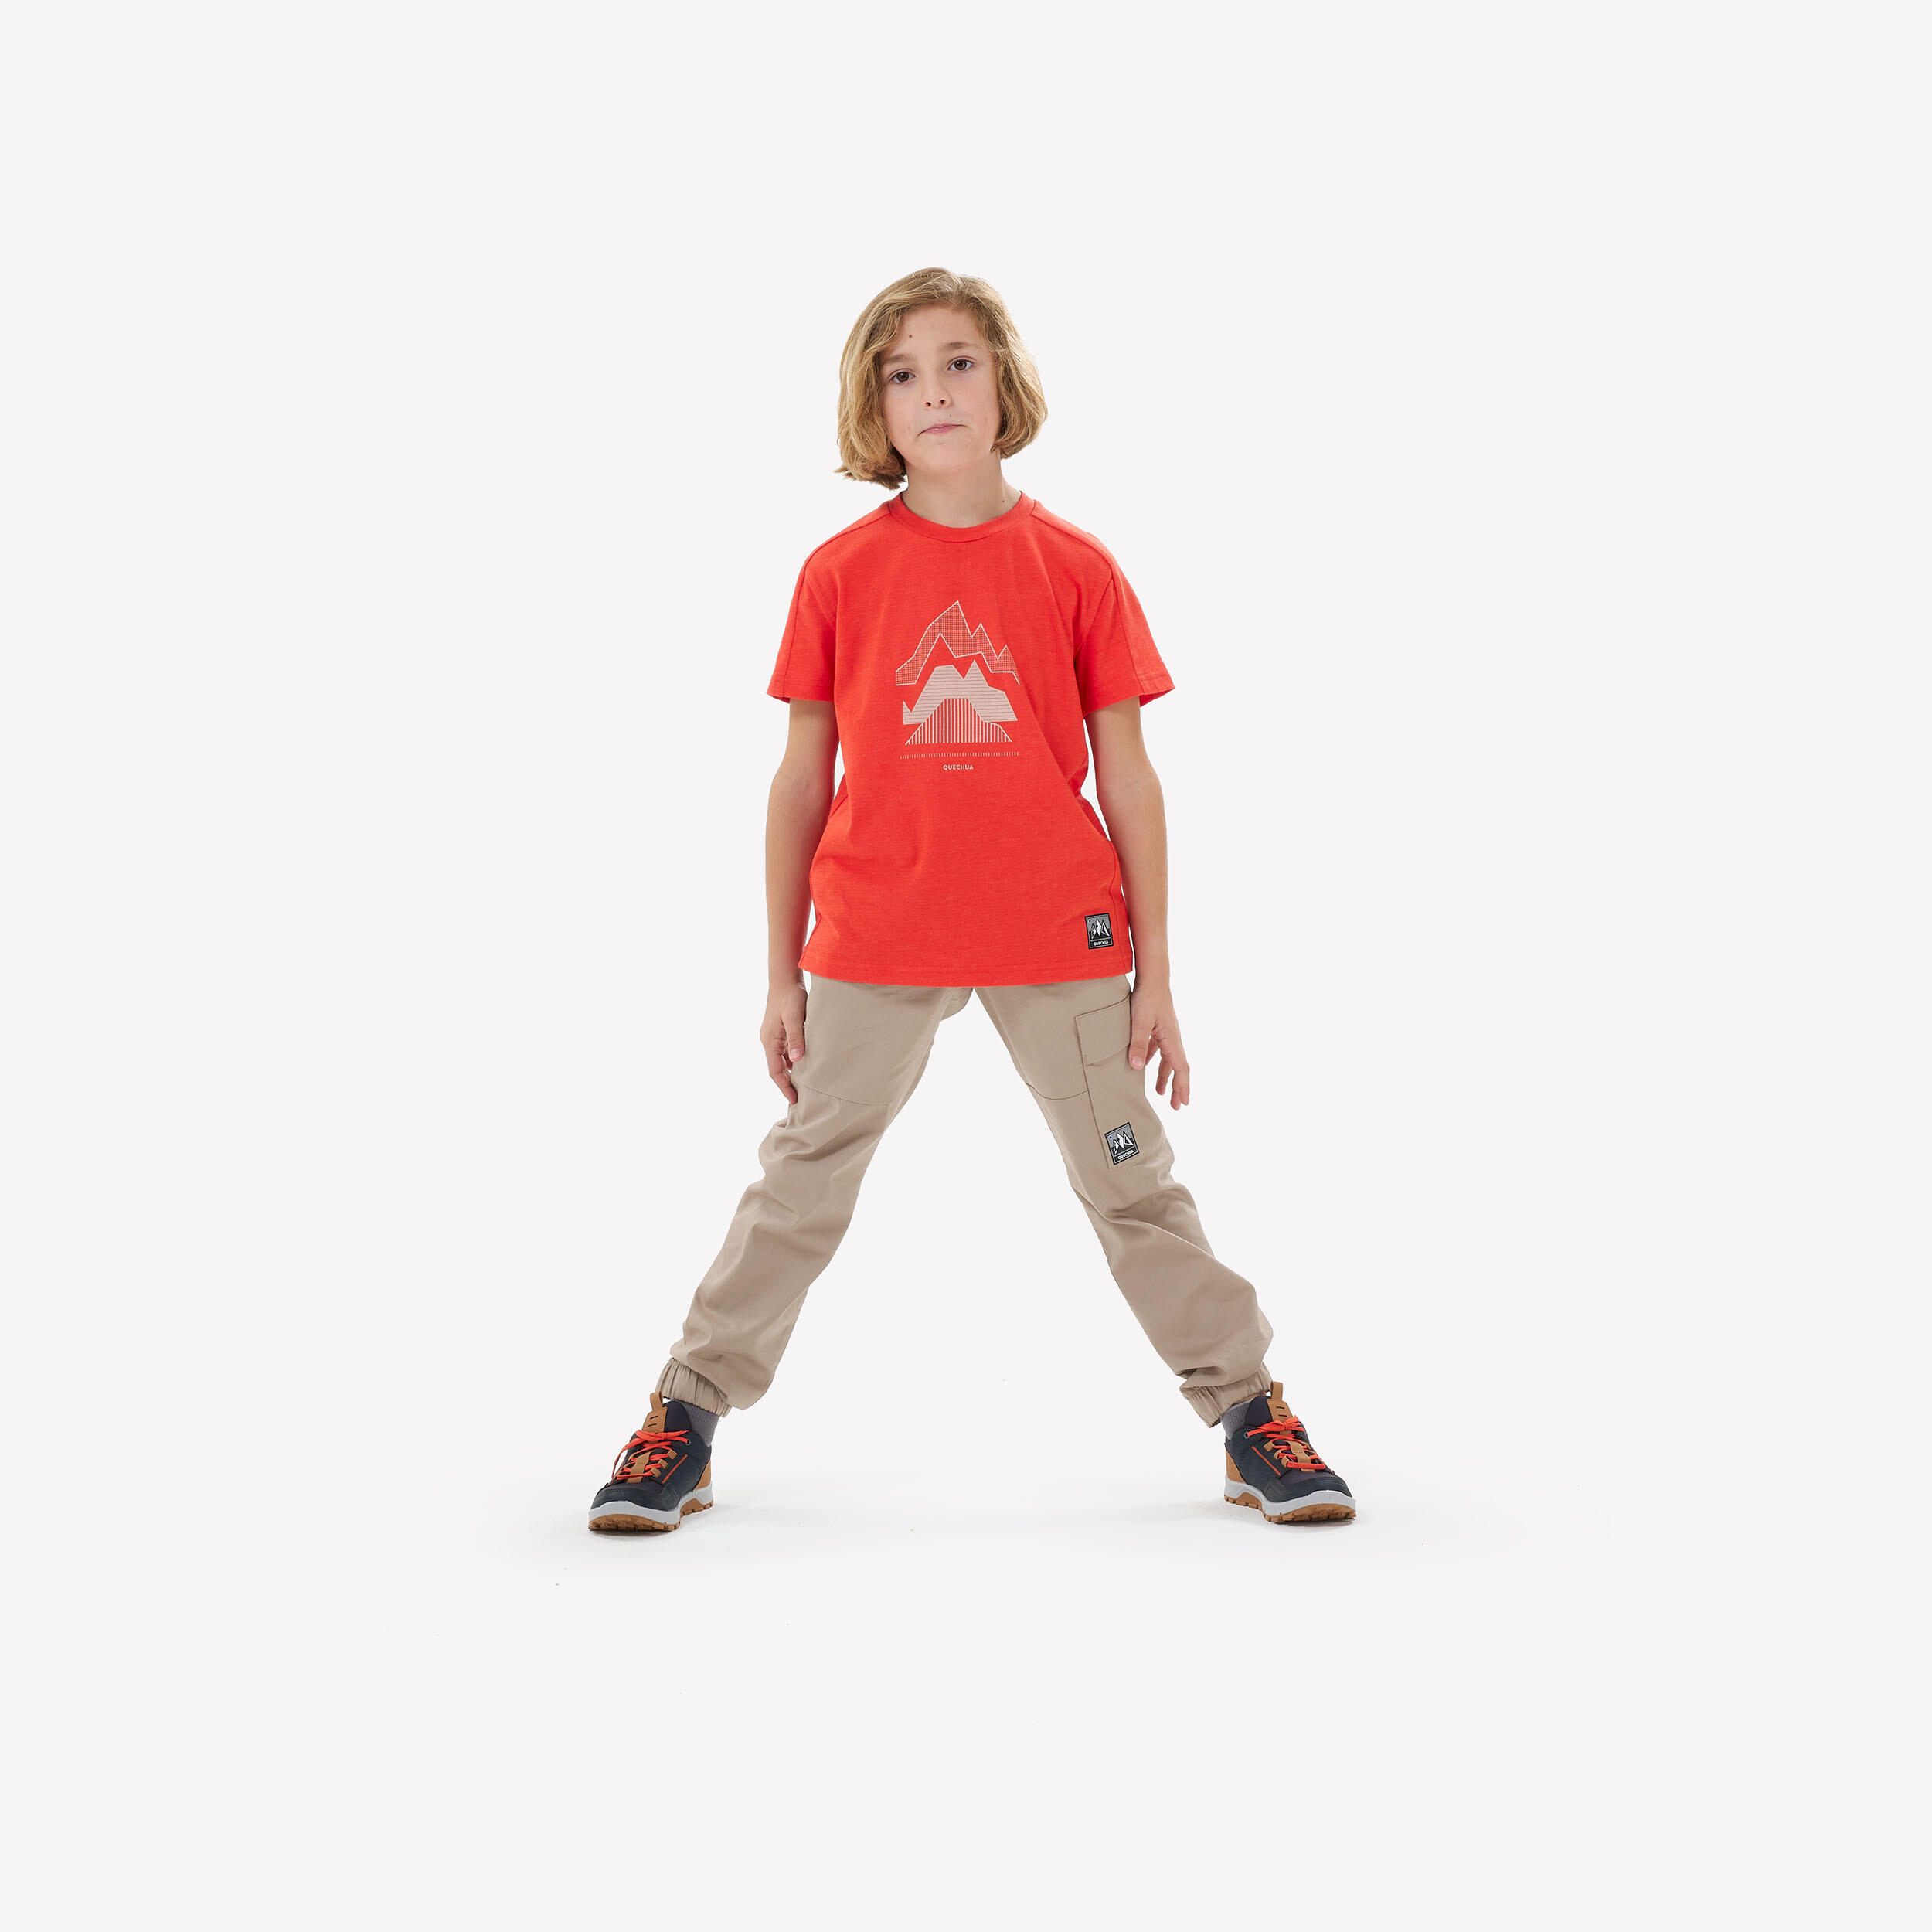 Kids’ Hiking T-Shirt - MH100 Ages 7-15 - Red 5/6